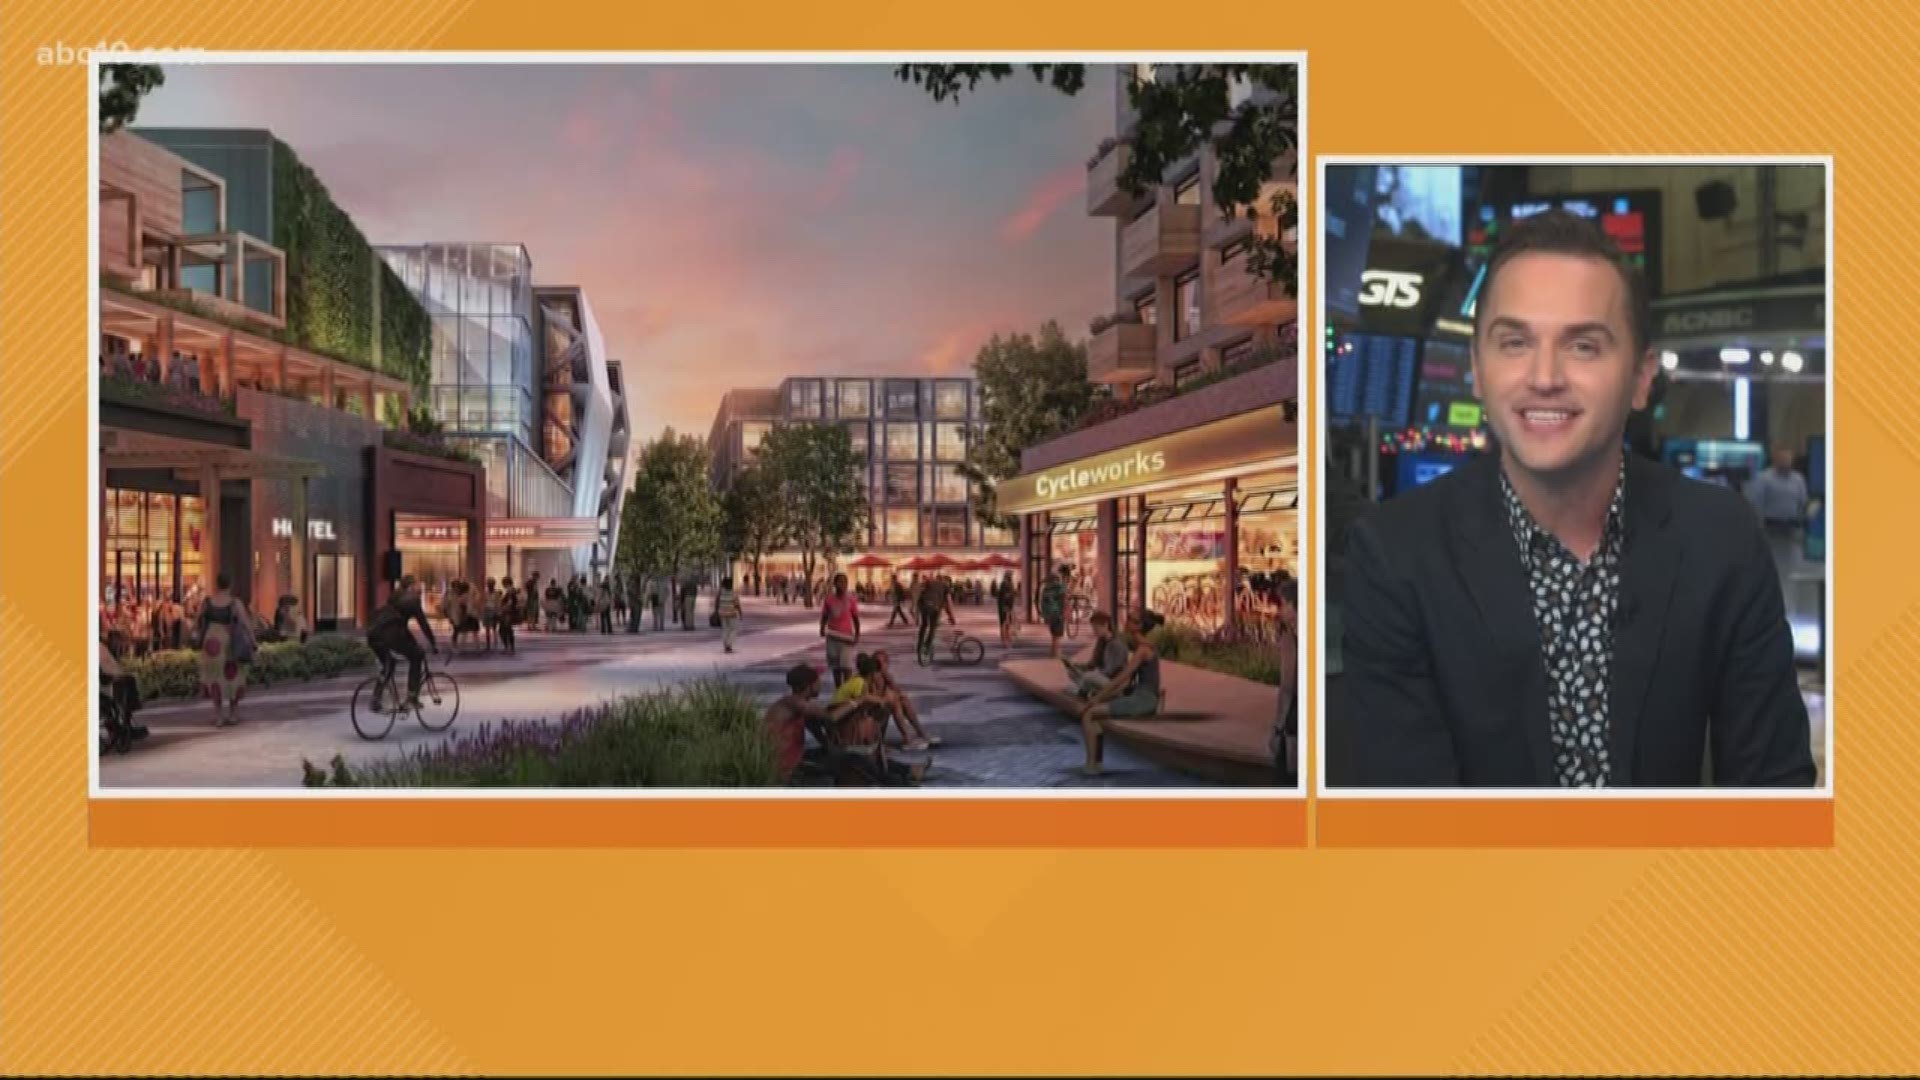 Cheddar's Baker Machado joins us from the New York Stock Exchange with today's business headlines.